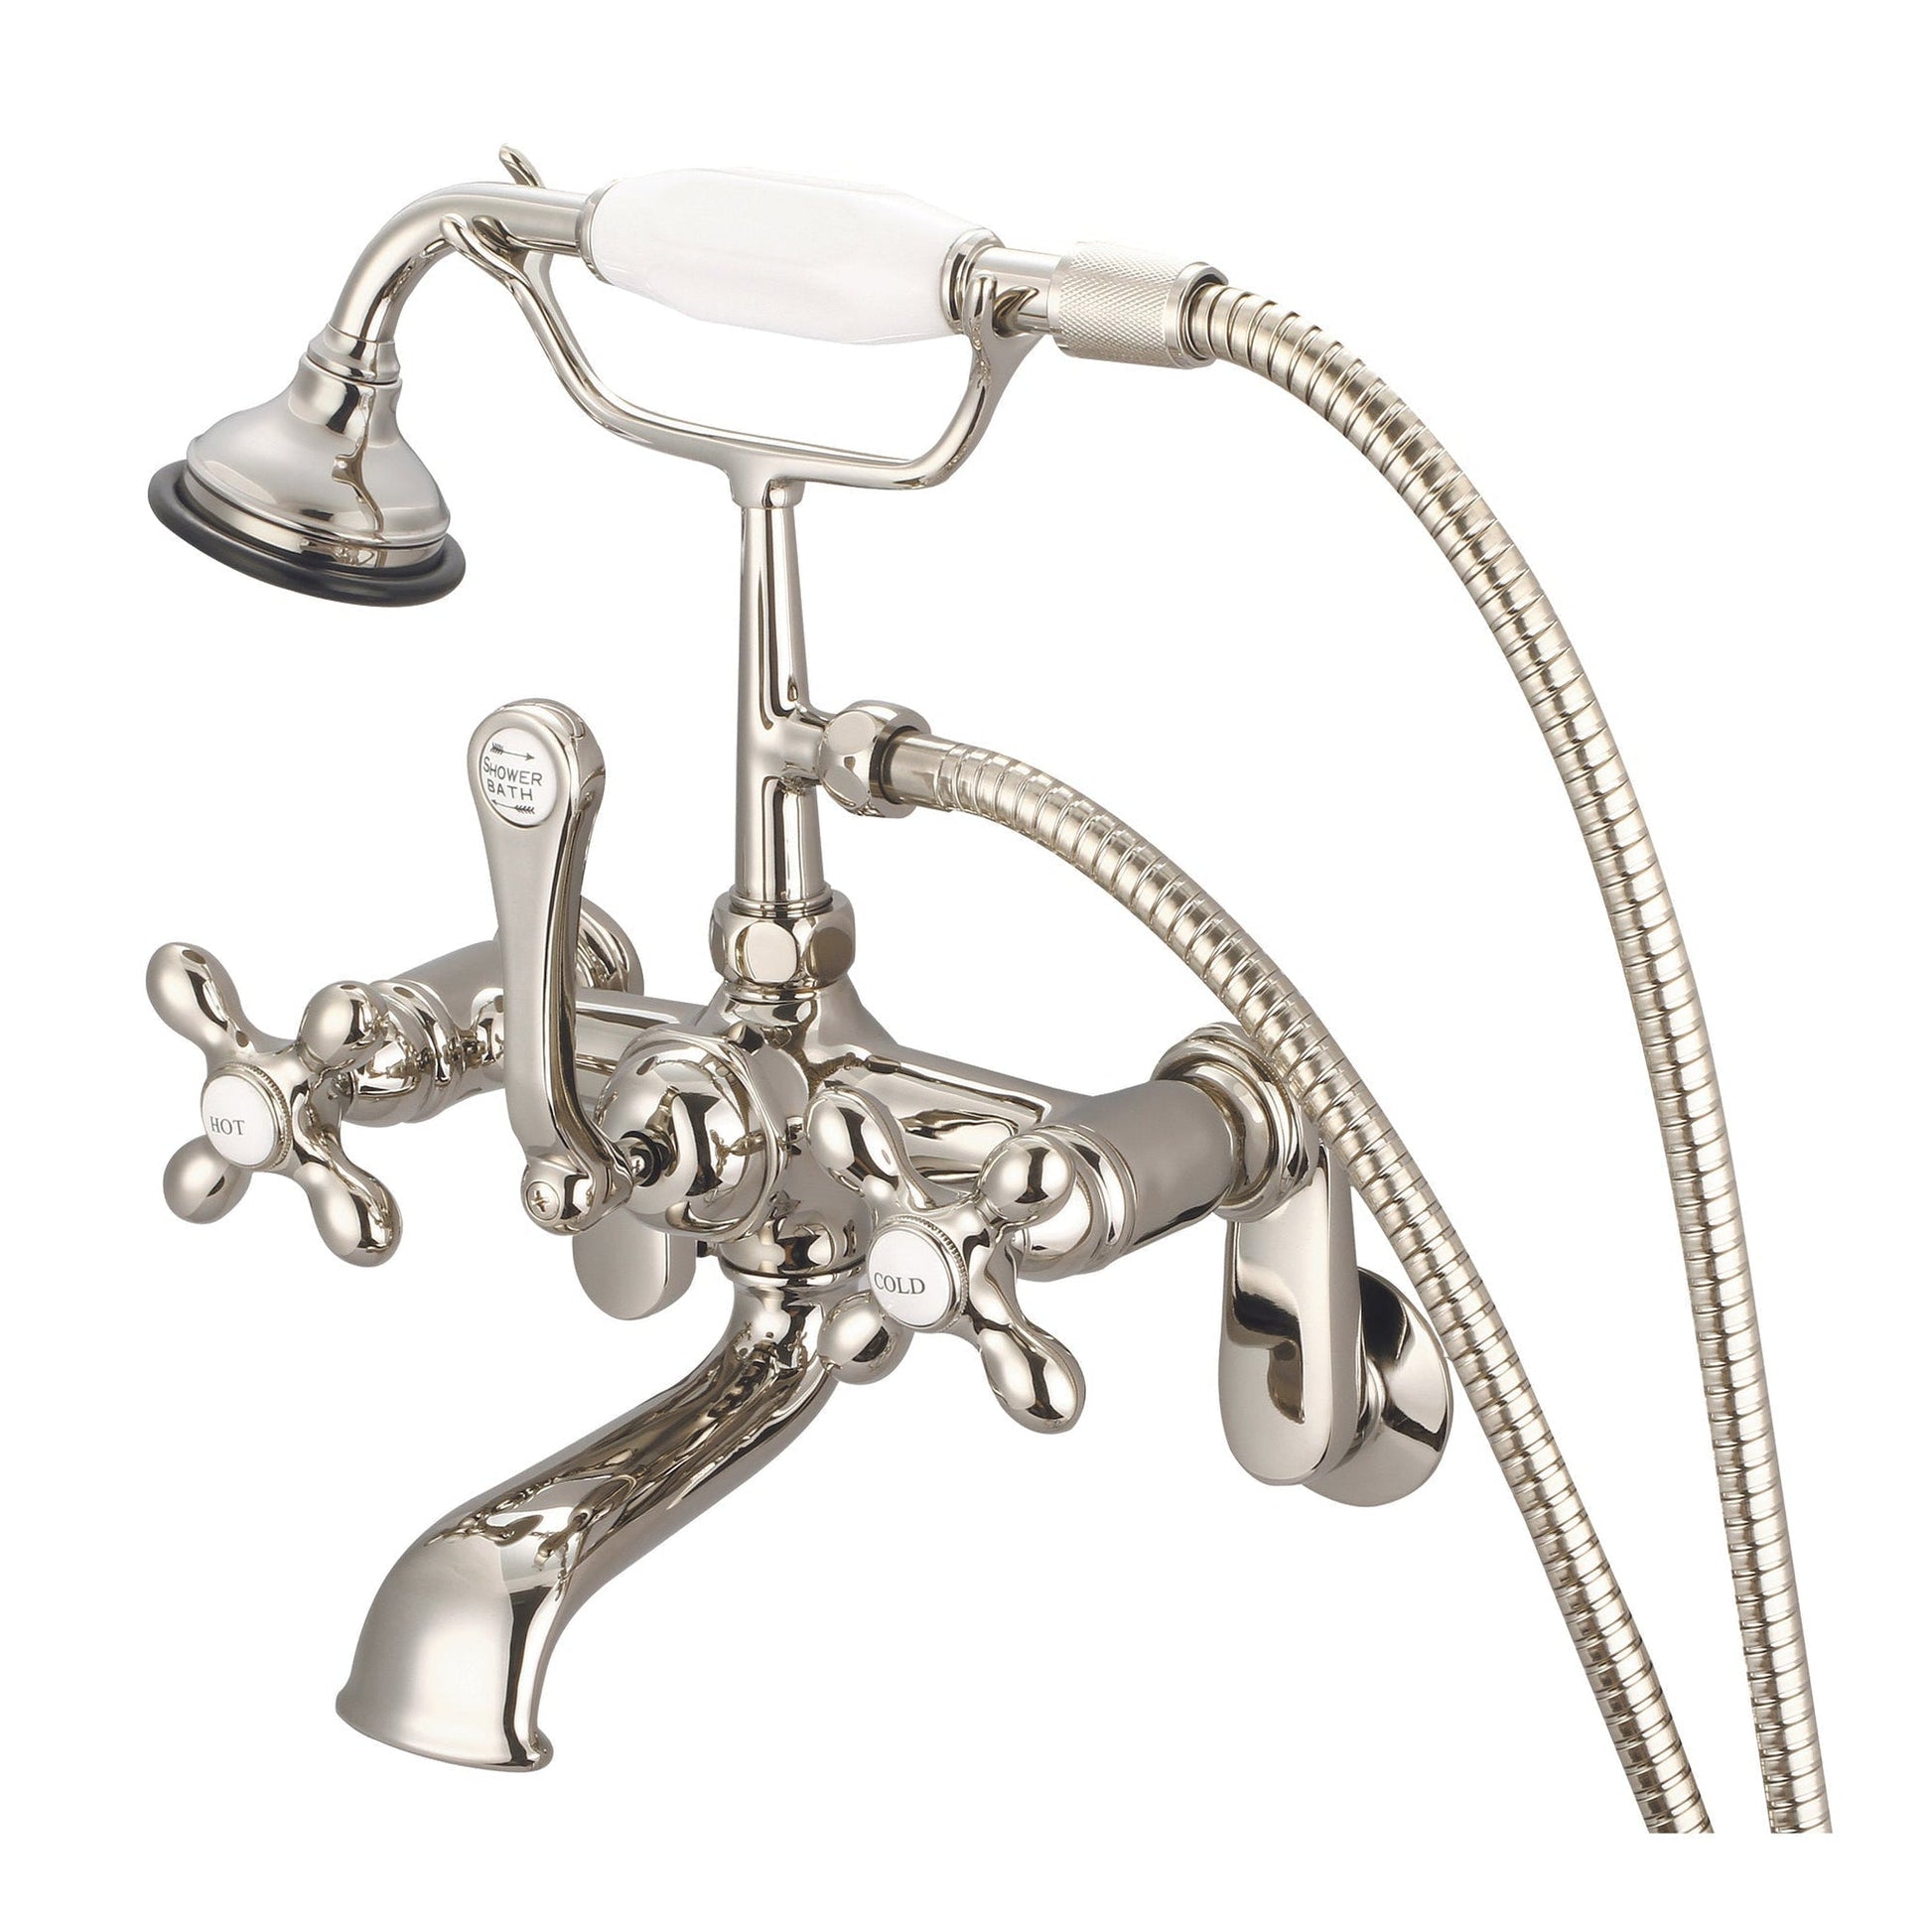 Water Creation Vintage Classic Adjustable Center Deck Mount Tub F6-0009 7" Ivory Solid Brass Faucet With Swivel Wall Connector And Handheld Shower And Metal Lever Handles, Hot And Cold Labels Included